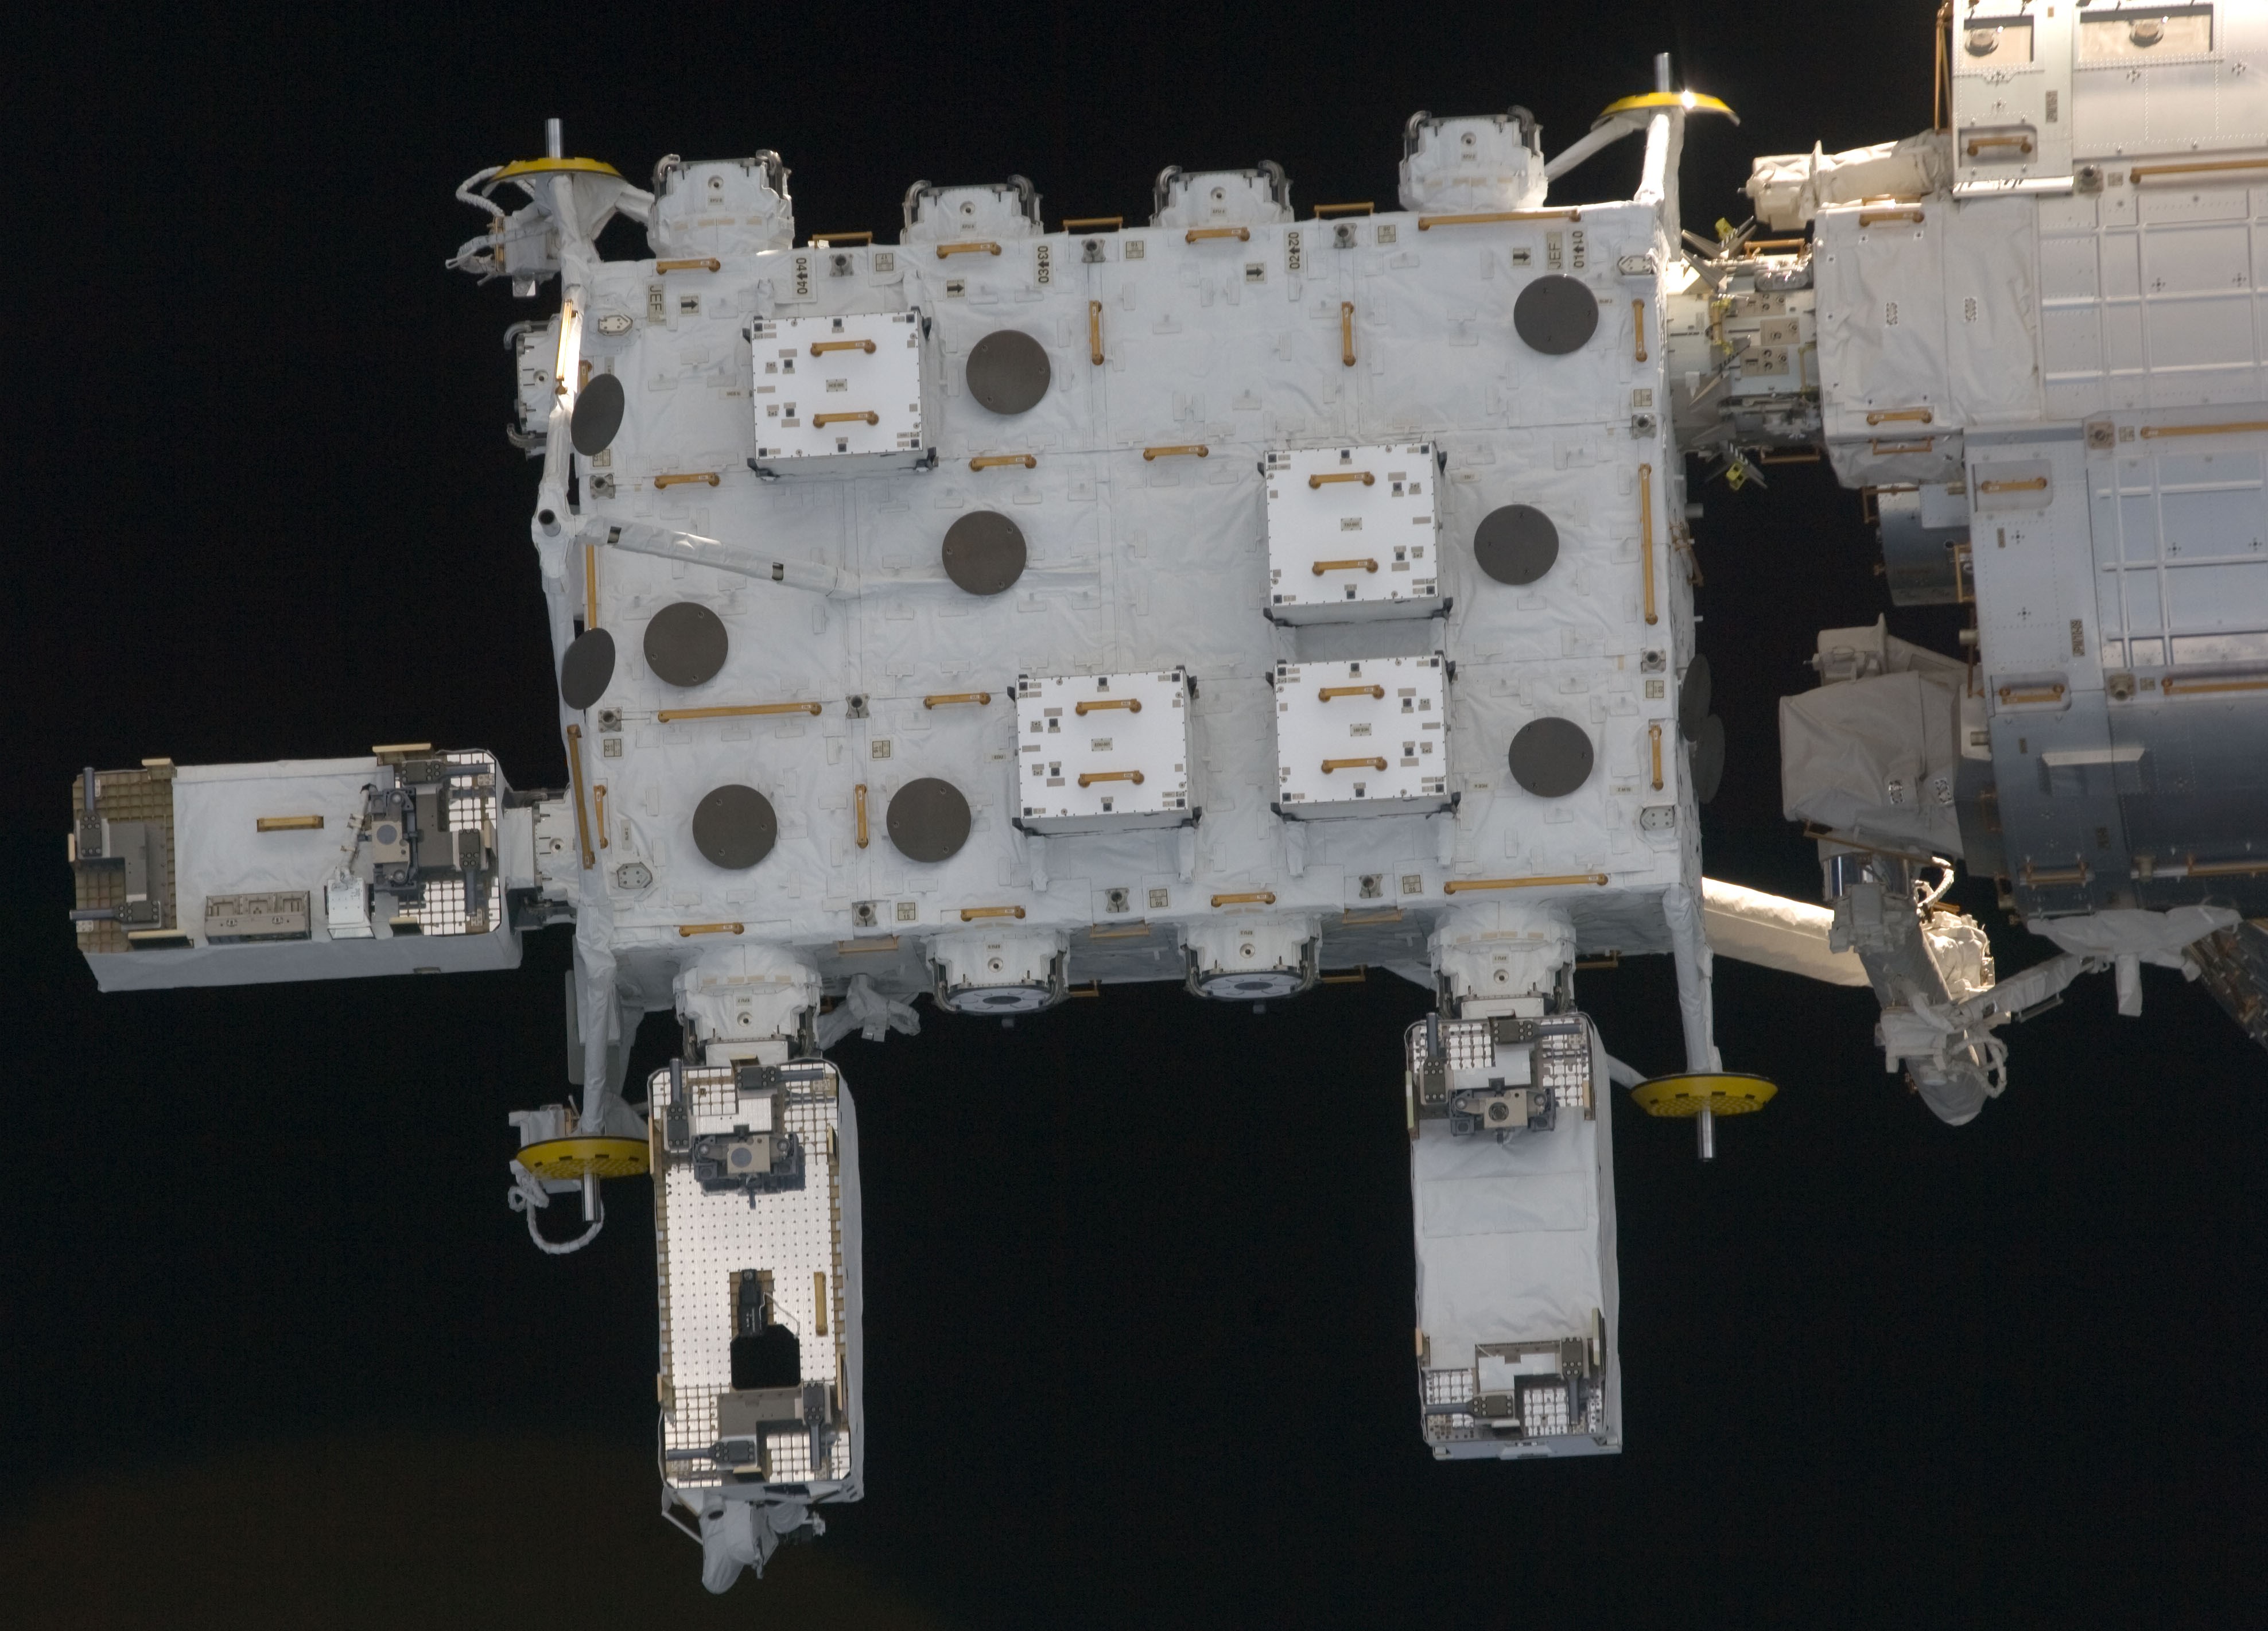 Photograph of the newly installed Exposed Facility on the Kibo Japanese Experiment Module